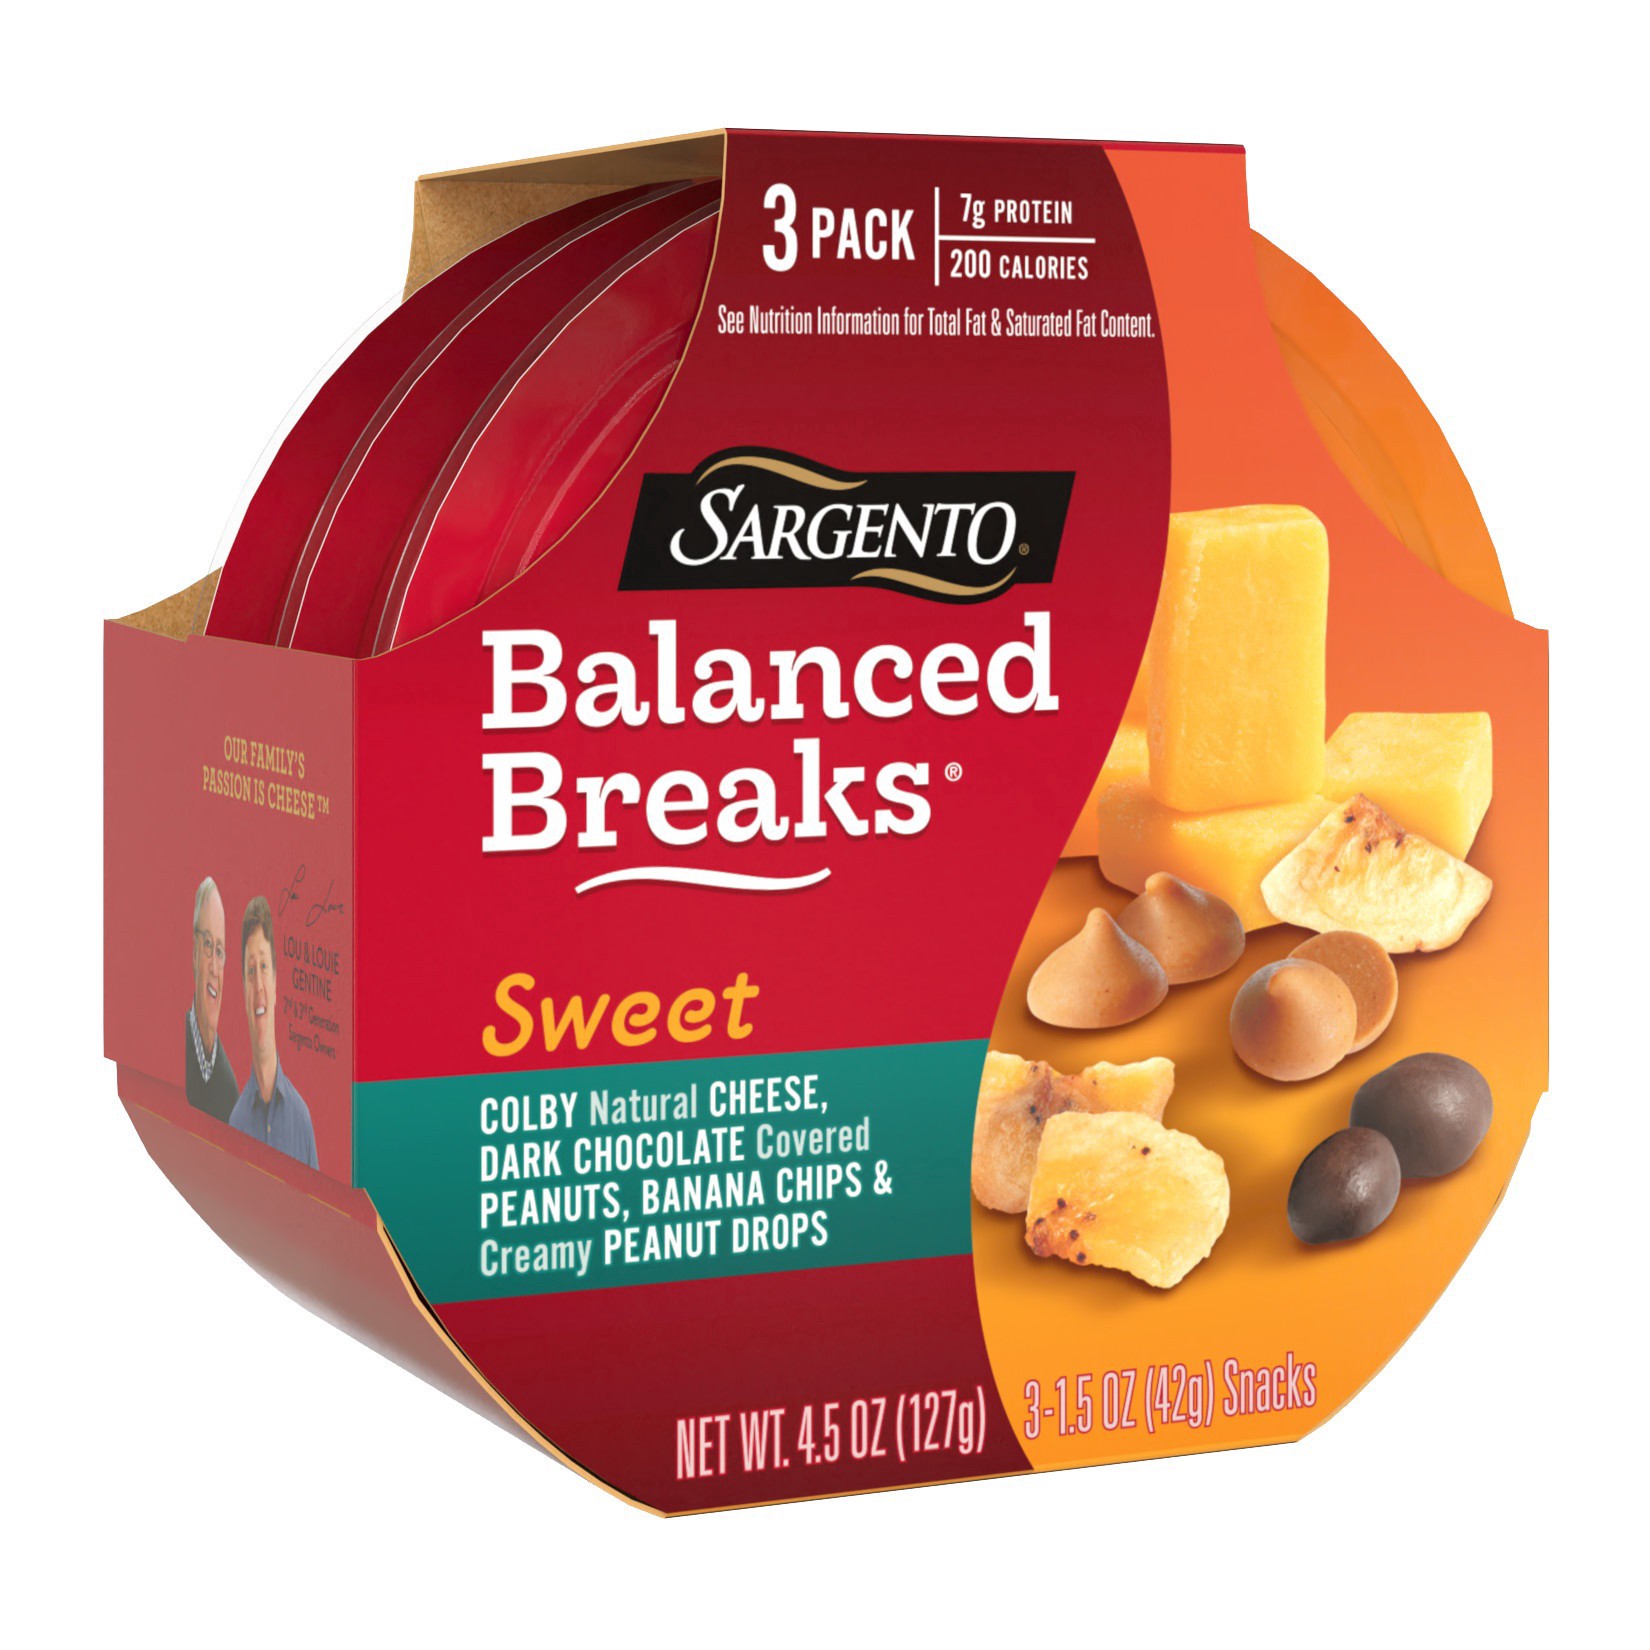 slide 3 of 17, Sargento Sweet Balanced Breaks with Colby Natural Cheese, Dark Chocolate Covered Peanuts, Banana Chips and Creamy Peanut Drops, 1.5 oz., 3-Pack, 4.5 oz